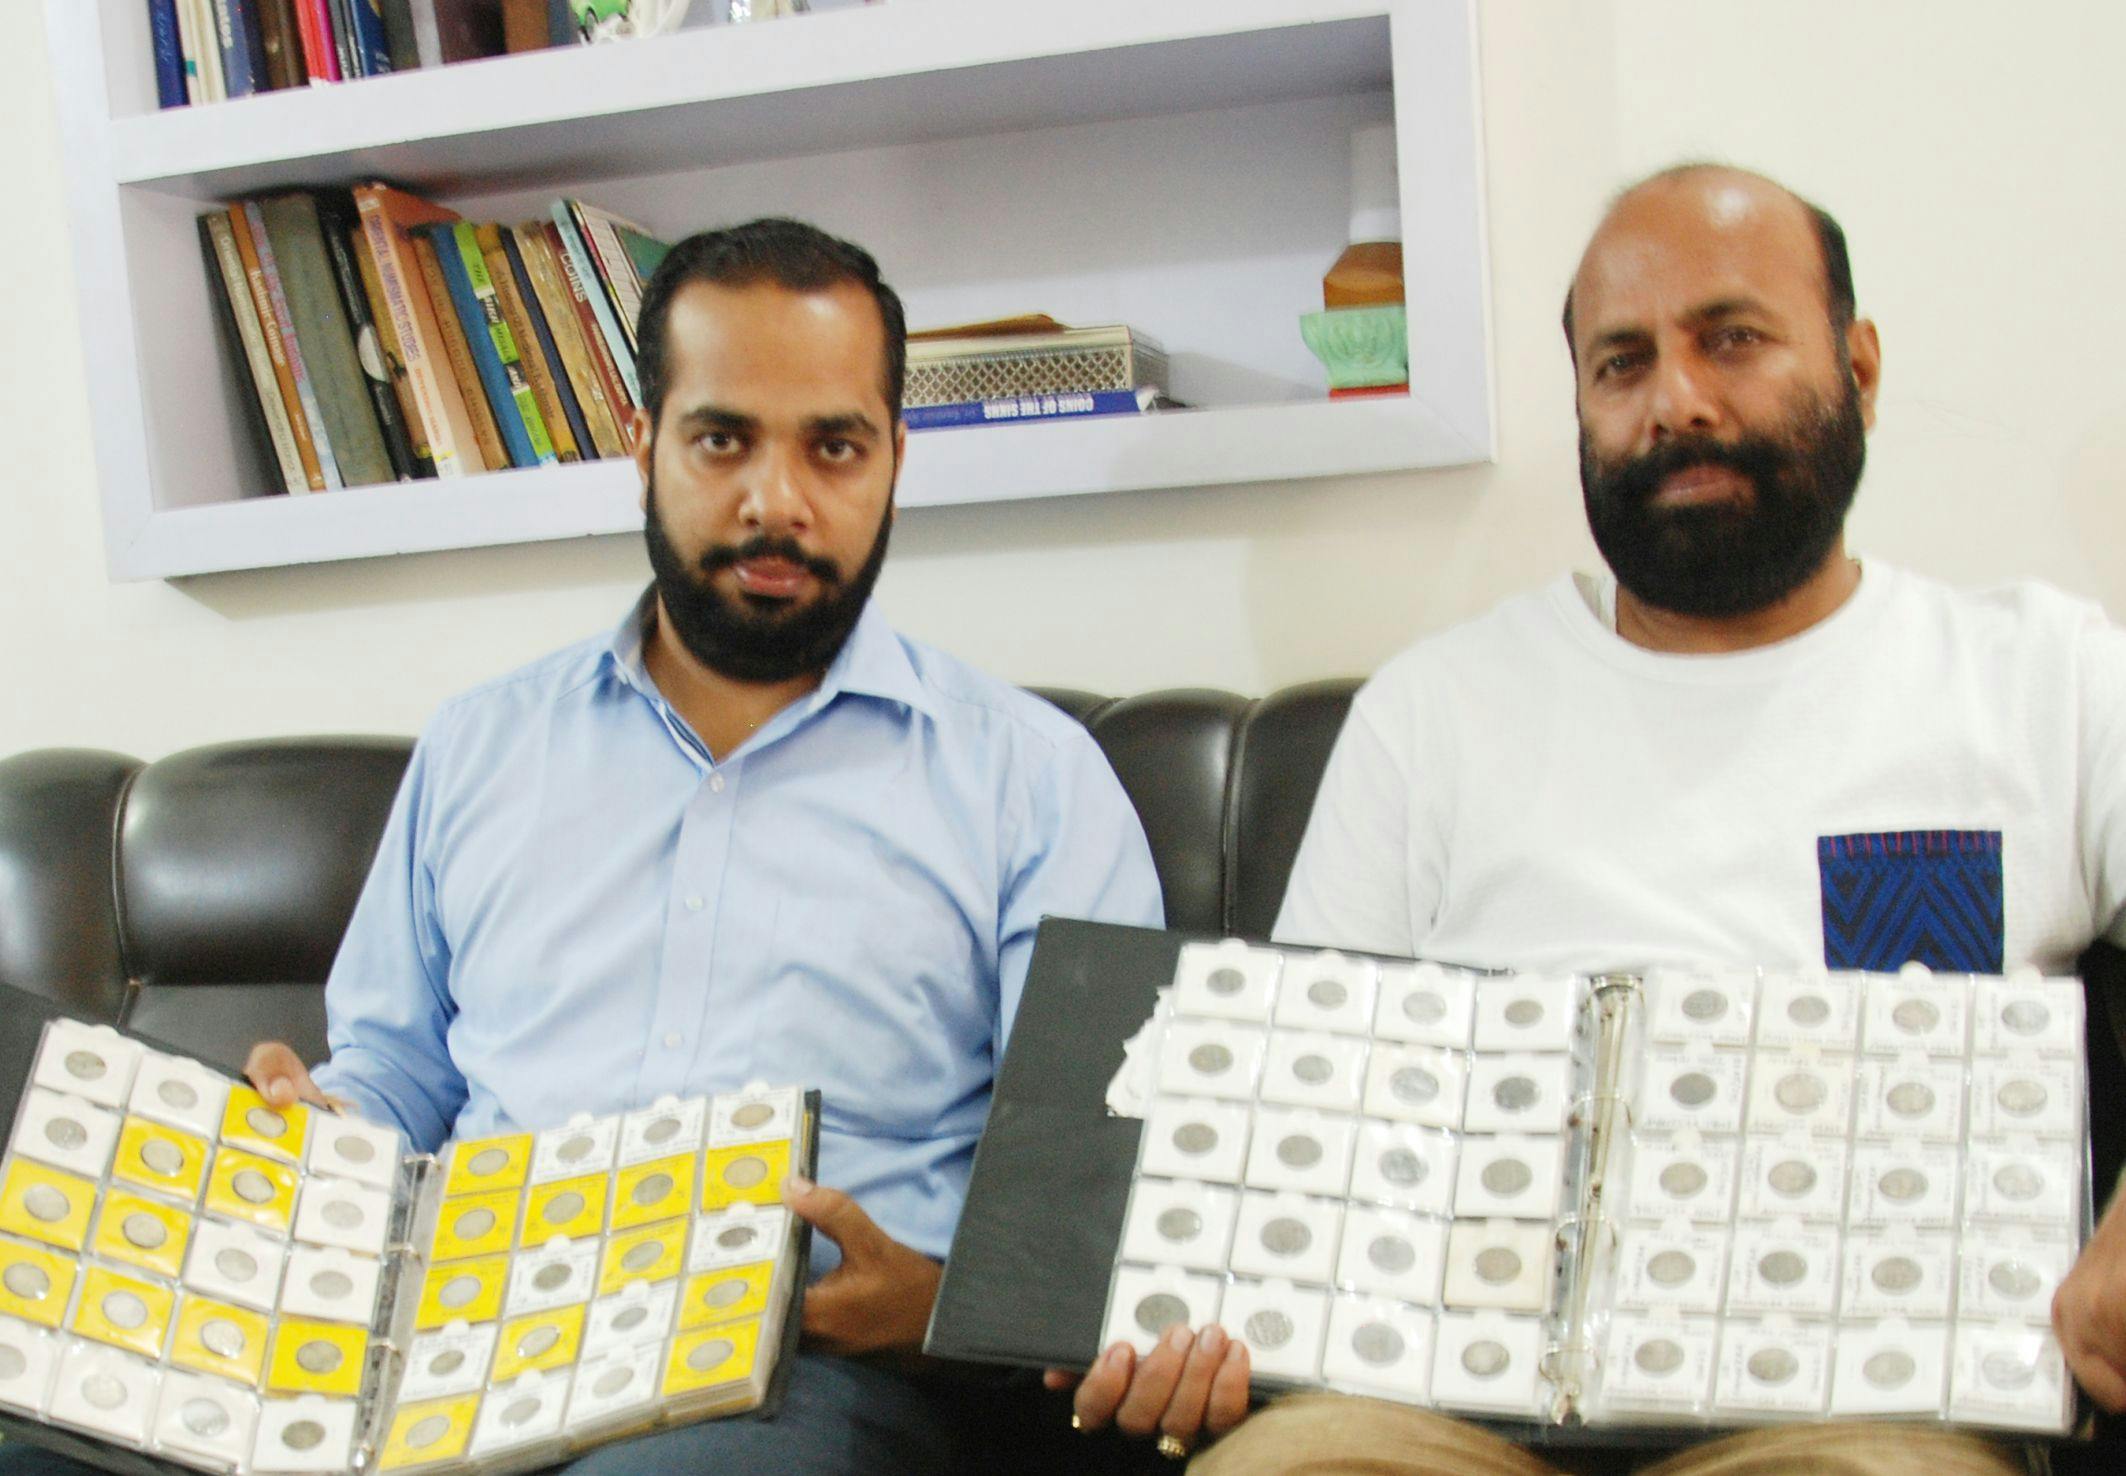 Prateek Sehdev and Dev Dard, along with Sikh coins